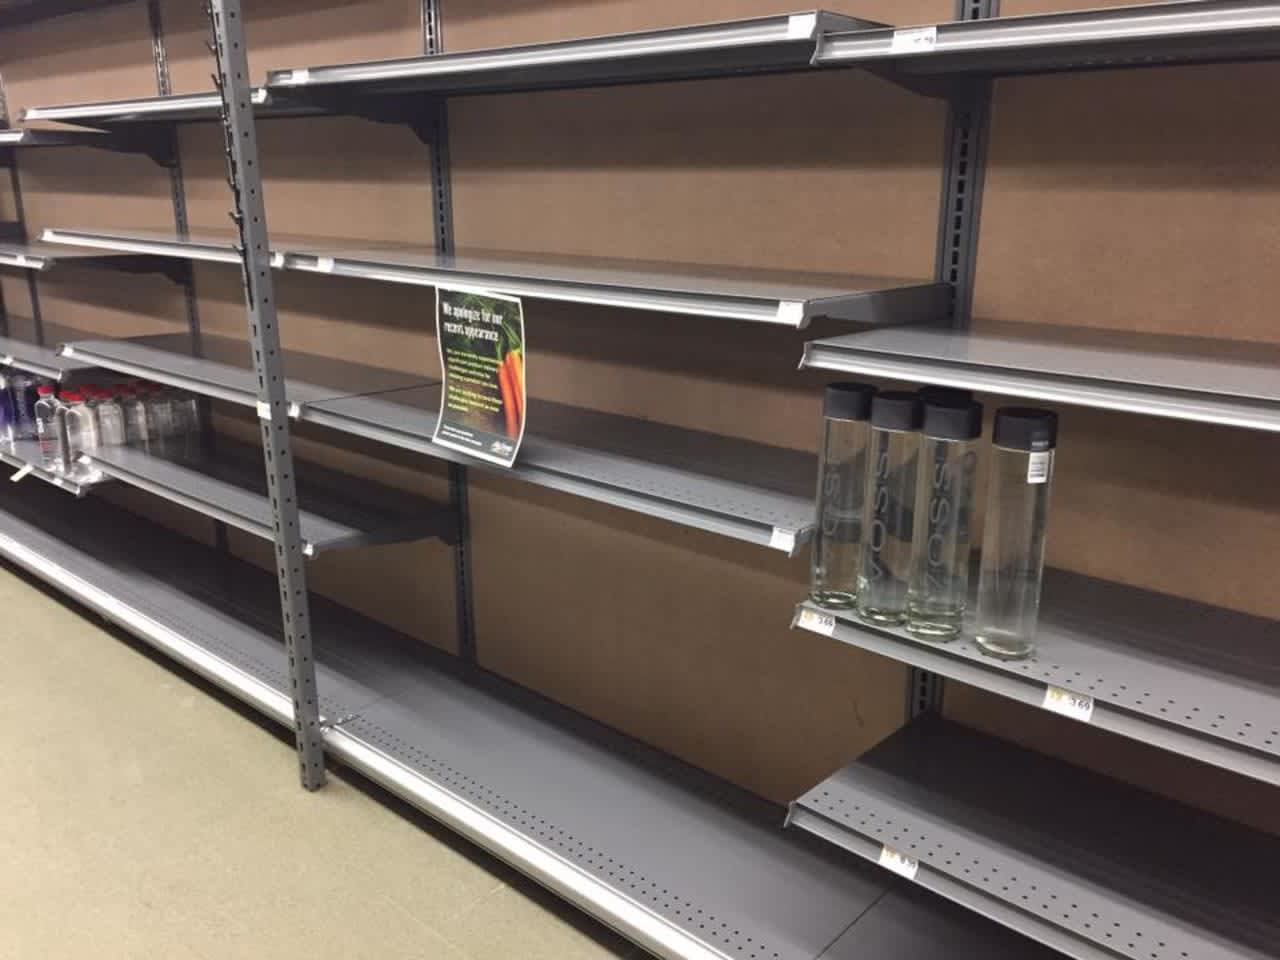 Residents have been concerned about empty shelves at Mrs. Green's.